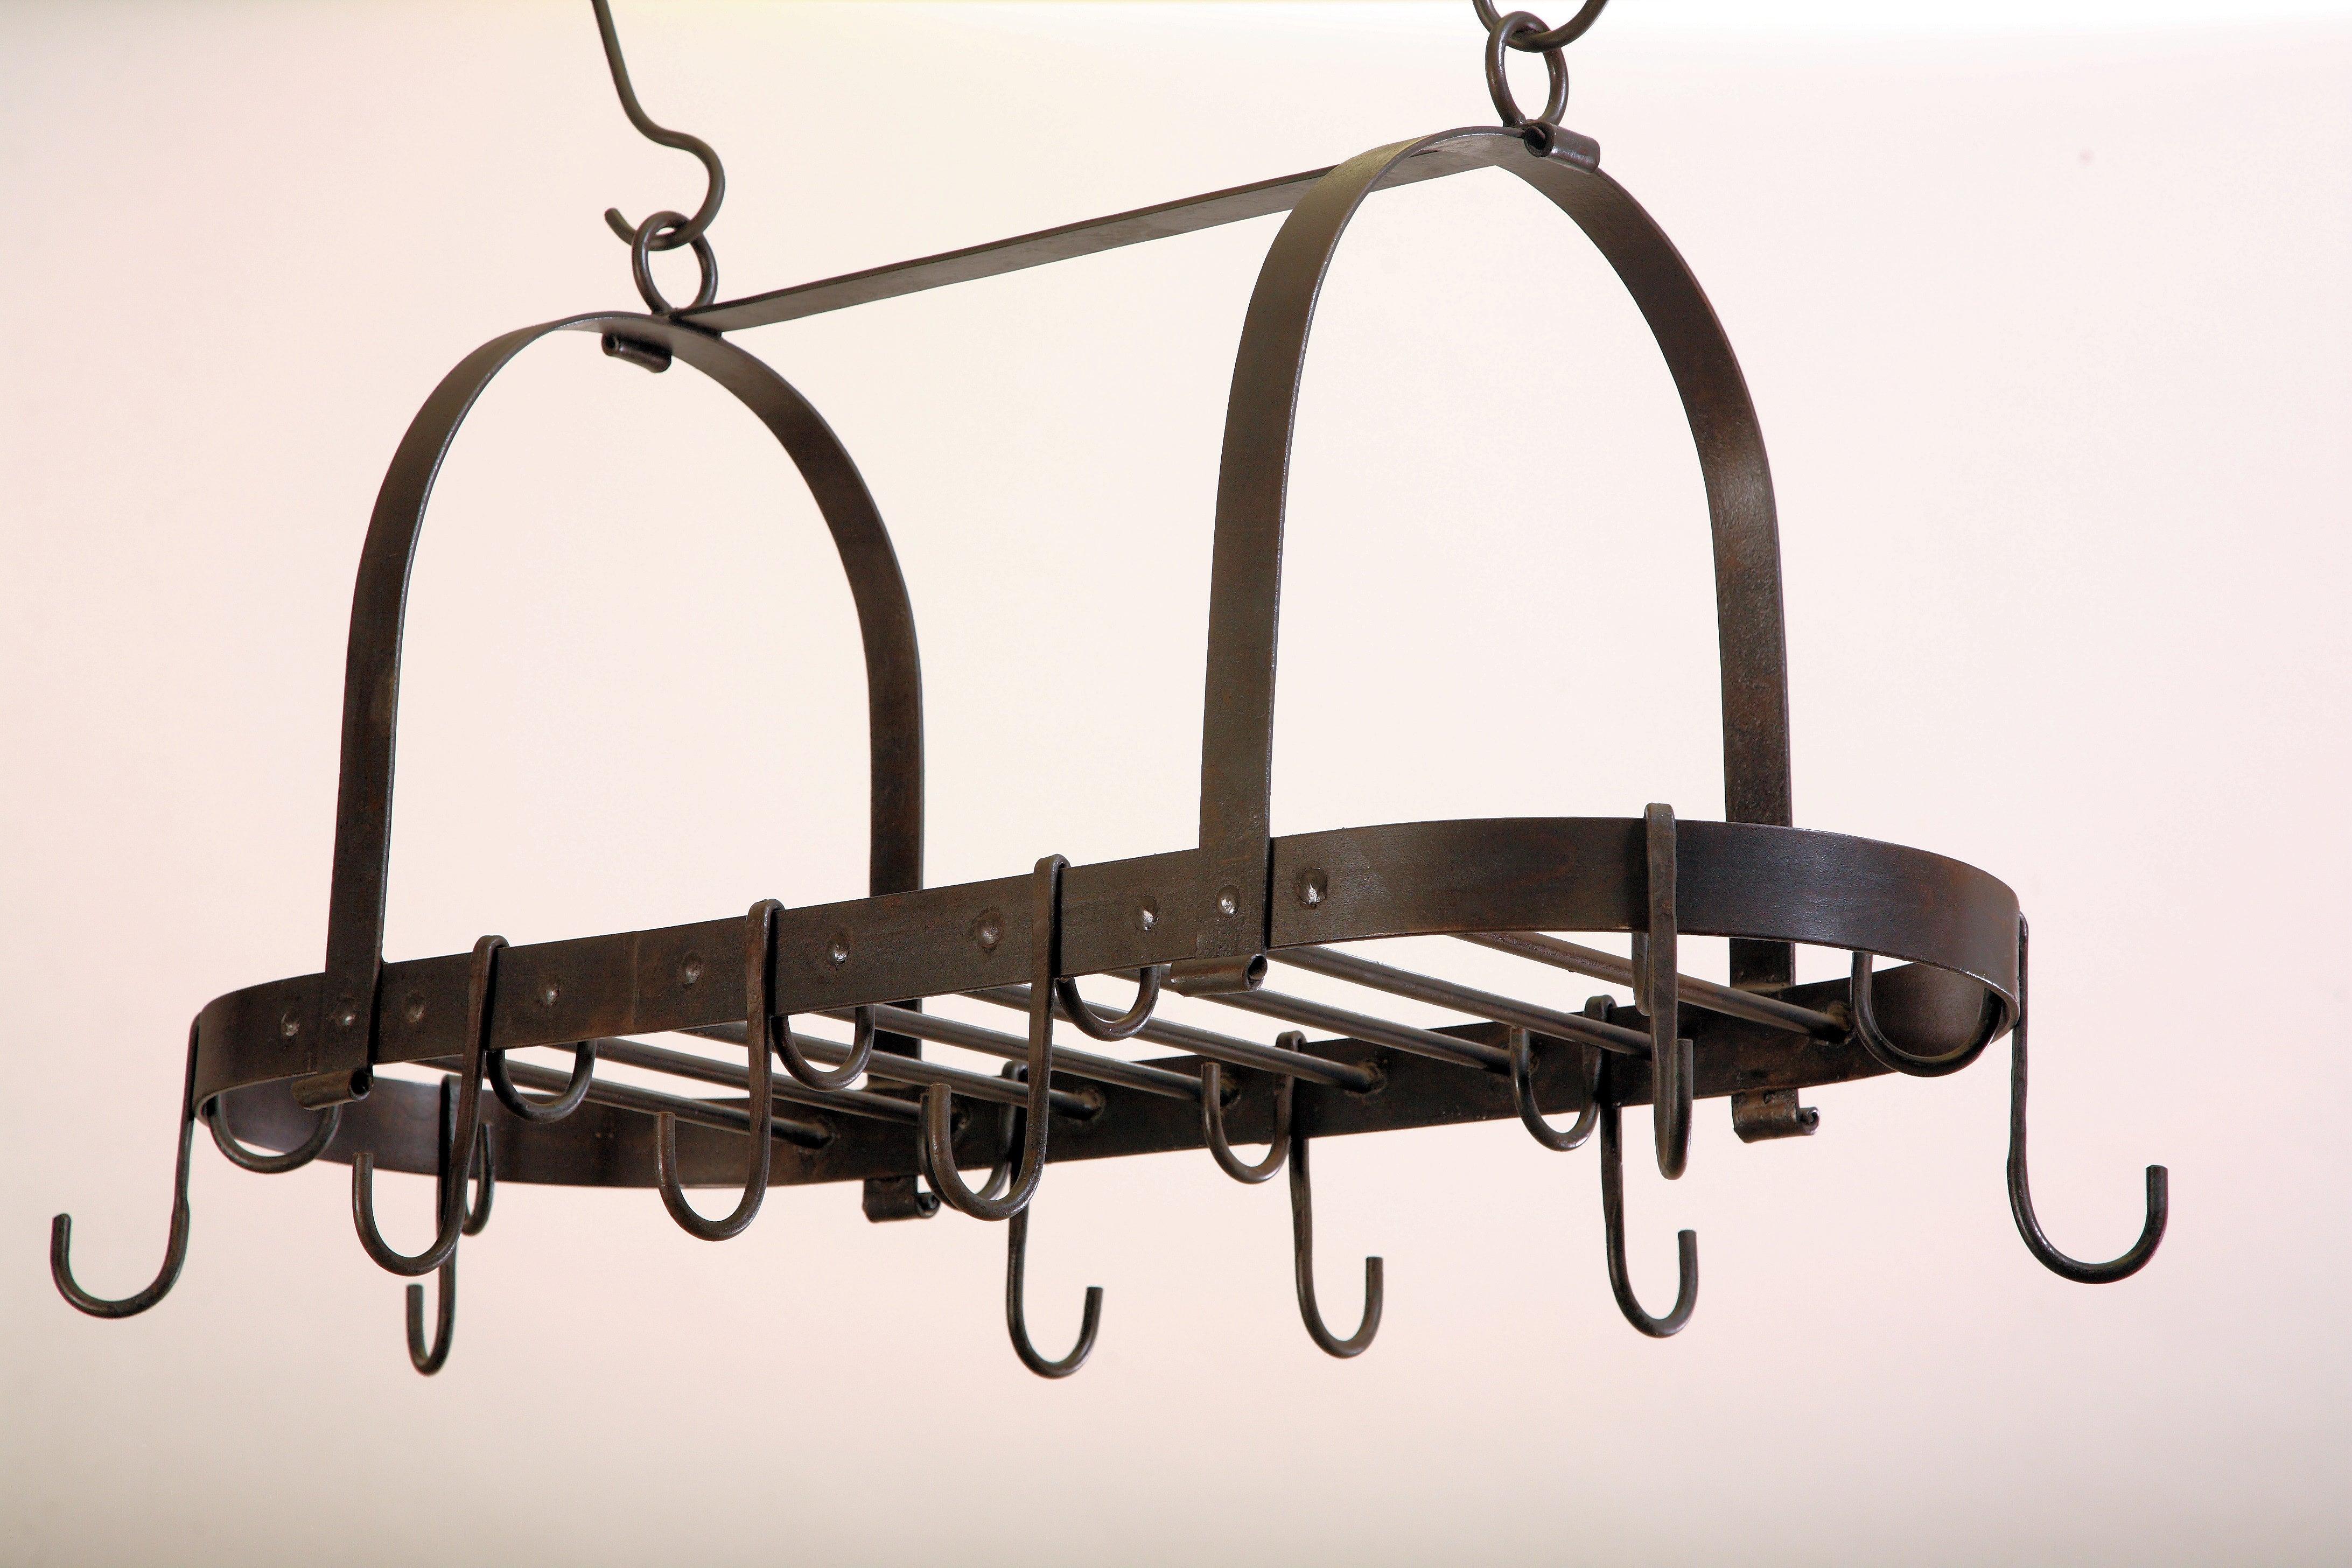 POT RACK. WROUGHT IRON WITH HOOKS – Forja del Sol